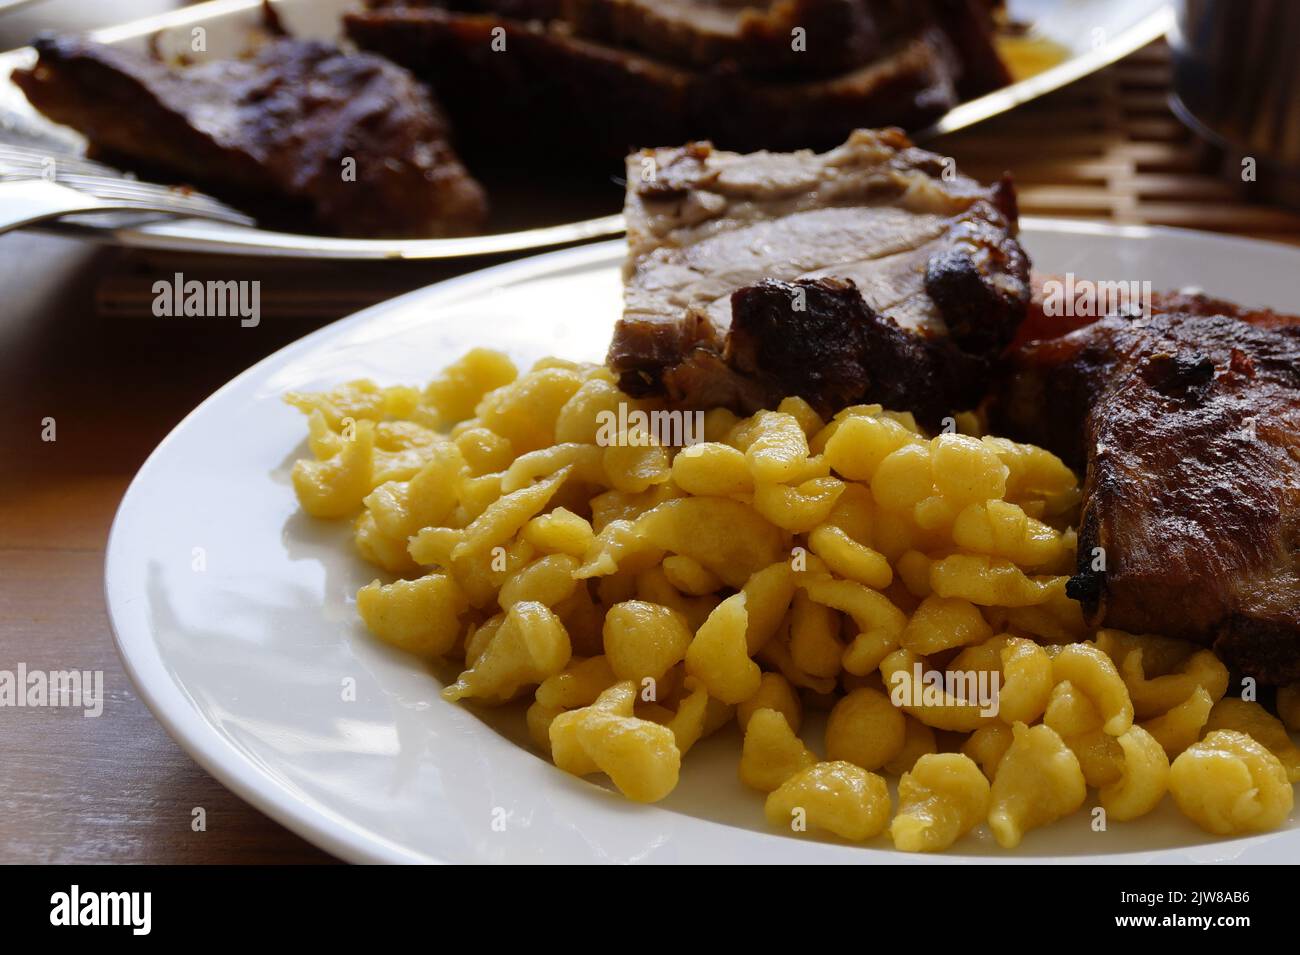 a Swabian meal of spaetzle or spaetzli with fried spareribs, Munich, Bavaria, Germany Stock Photo